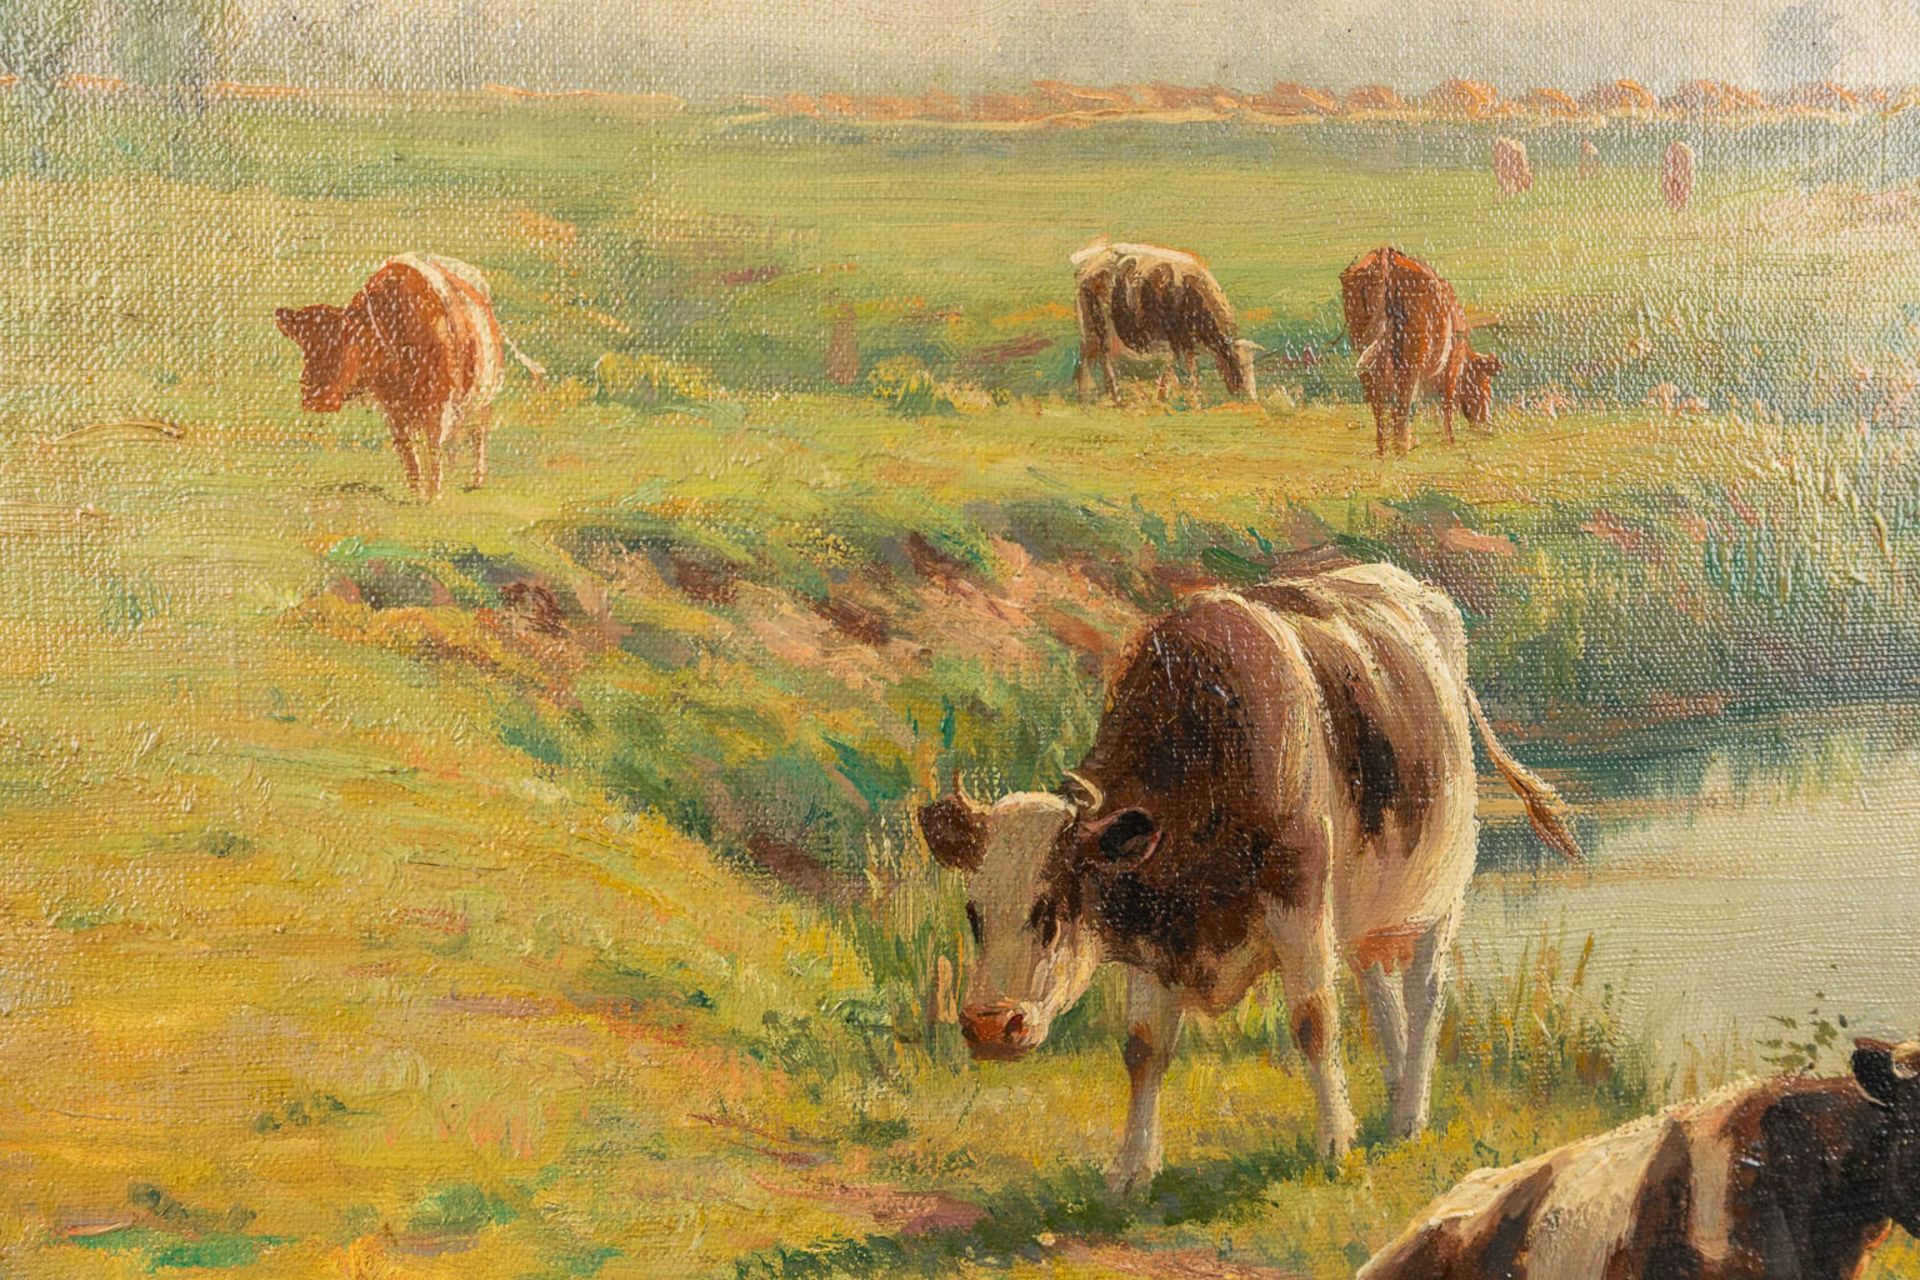 Albert CAULLET (1875-1950) 'Cows in the field' a painting, oil on canvas. (W:70 x H:50 cm) - Image 4 of 7